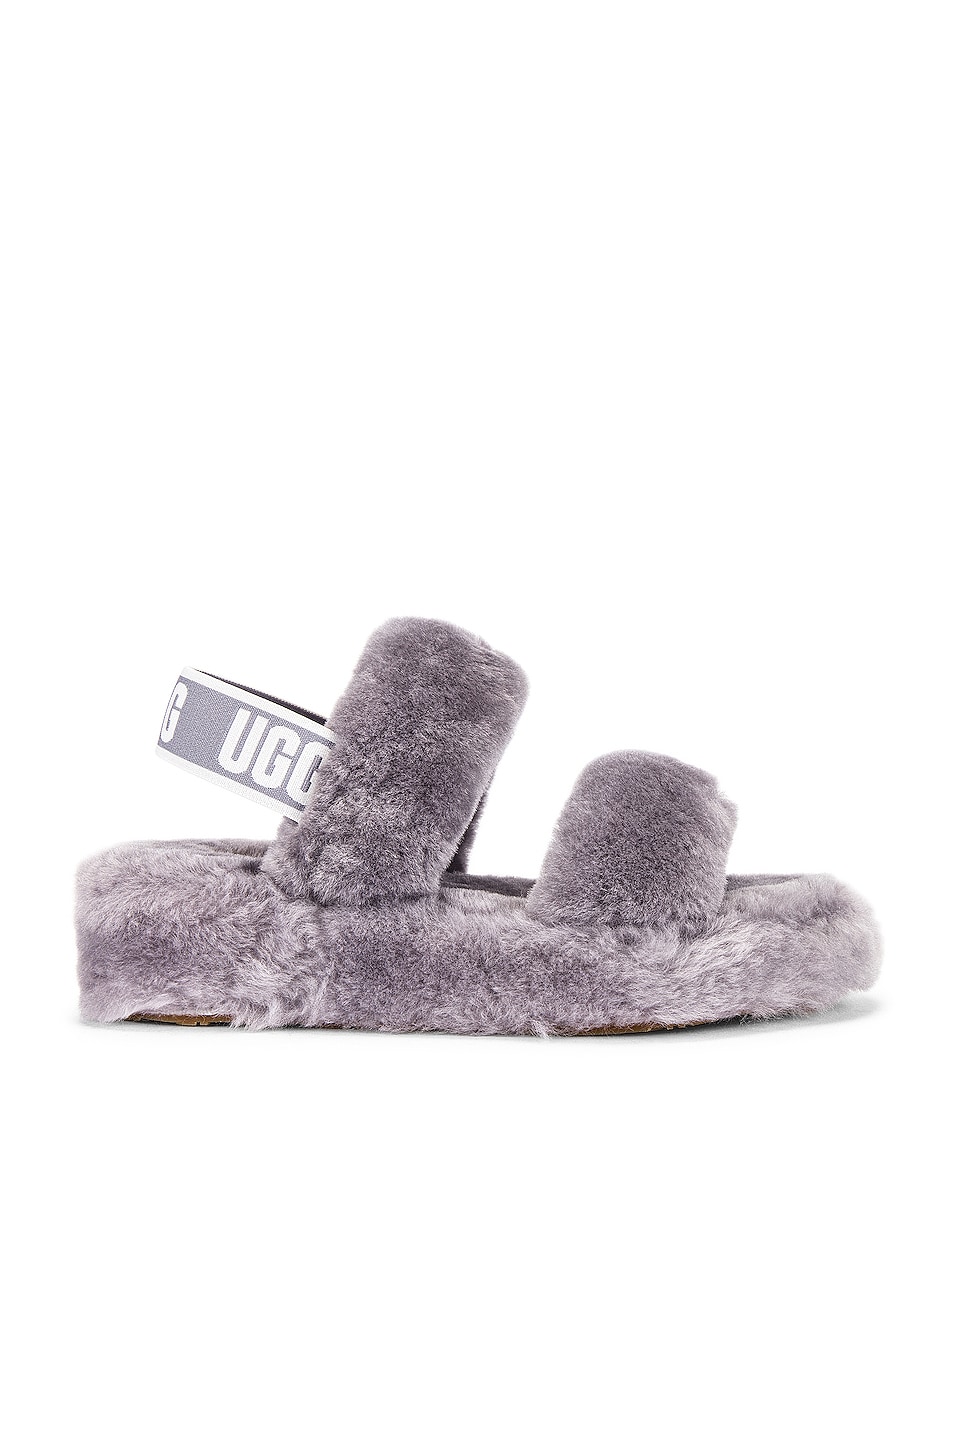 ugg slippers oh yeah slide